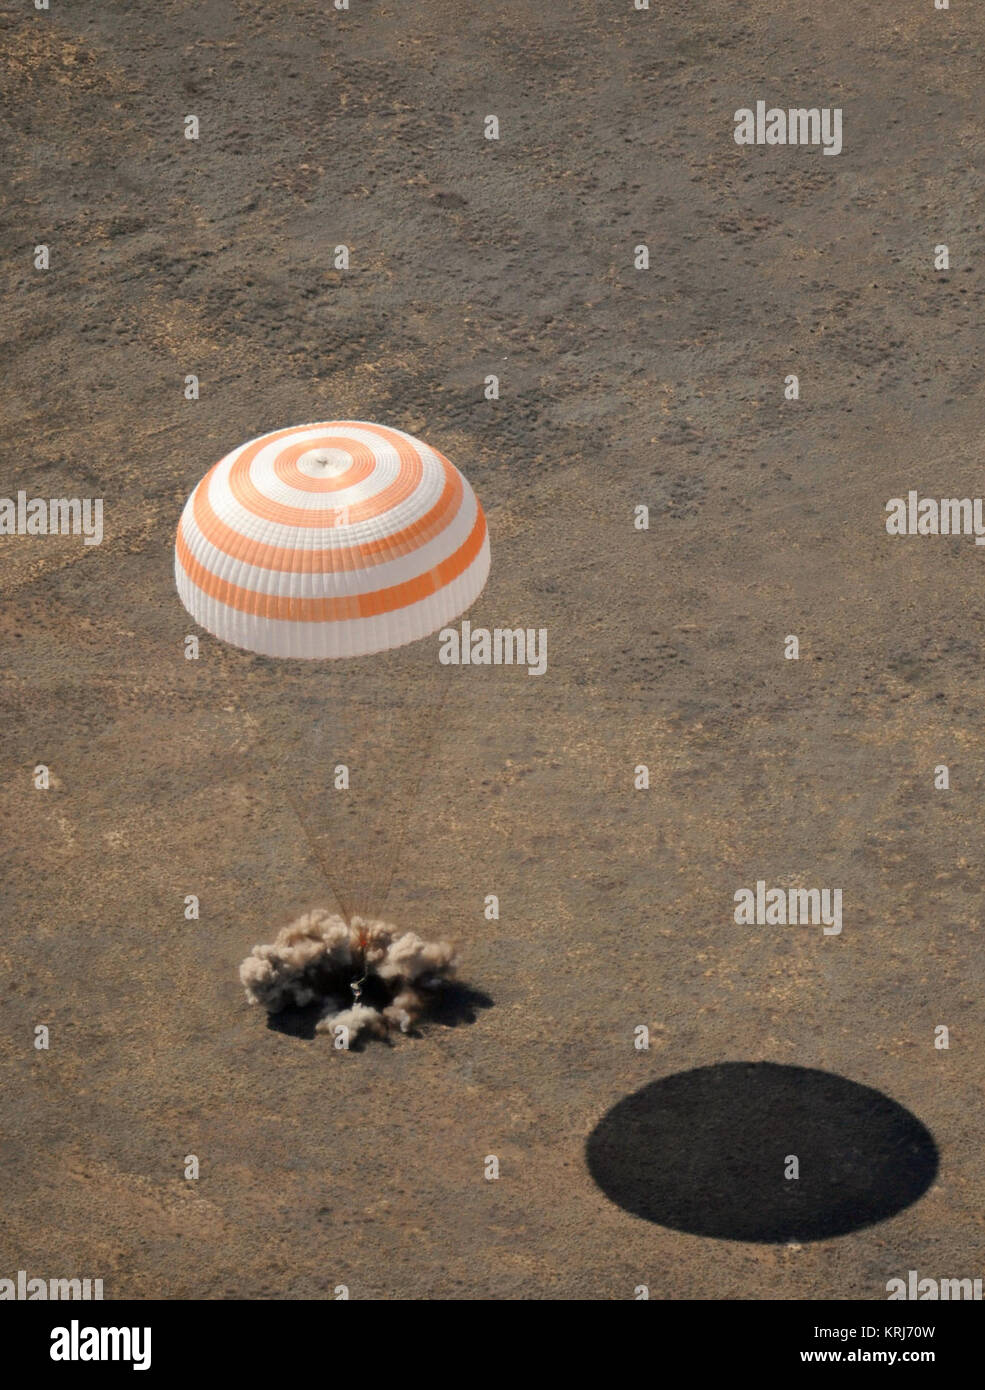 The Soyuz TMA-13 spacecraft, carrying Expedition 18 Commander Michael Fincke, Flight Engineer Yury V. Lonchakov and American Spaceflight Participant Charles Simonyi, lands, Wednesday, April 8, 2009, near Zhezkazgan, Kazakhstan.  Fincke and Lonchakov return after spending six months on the International Space Station, and Simonyi is returning from his launch with the Expedition 19 crew members twelve days earlier.  Photo Credit: (NASA/Bill Ingalls) Soyuz TMA-13 landing Stock Photo